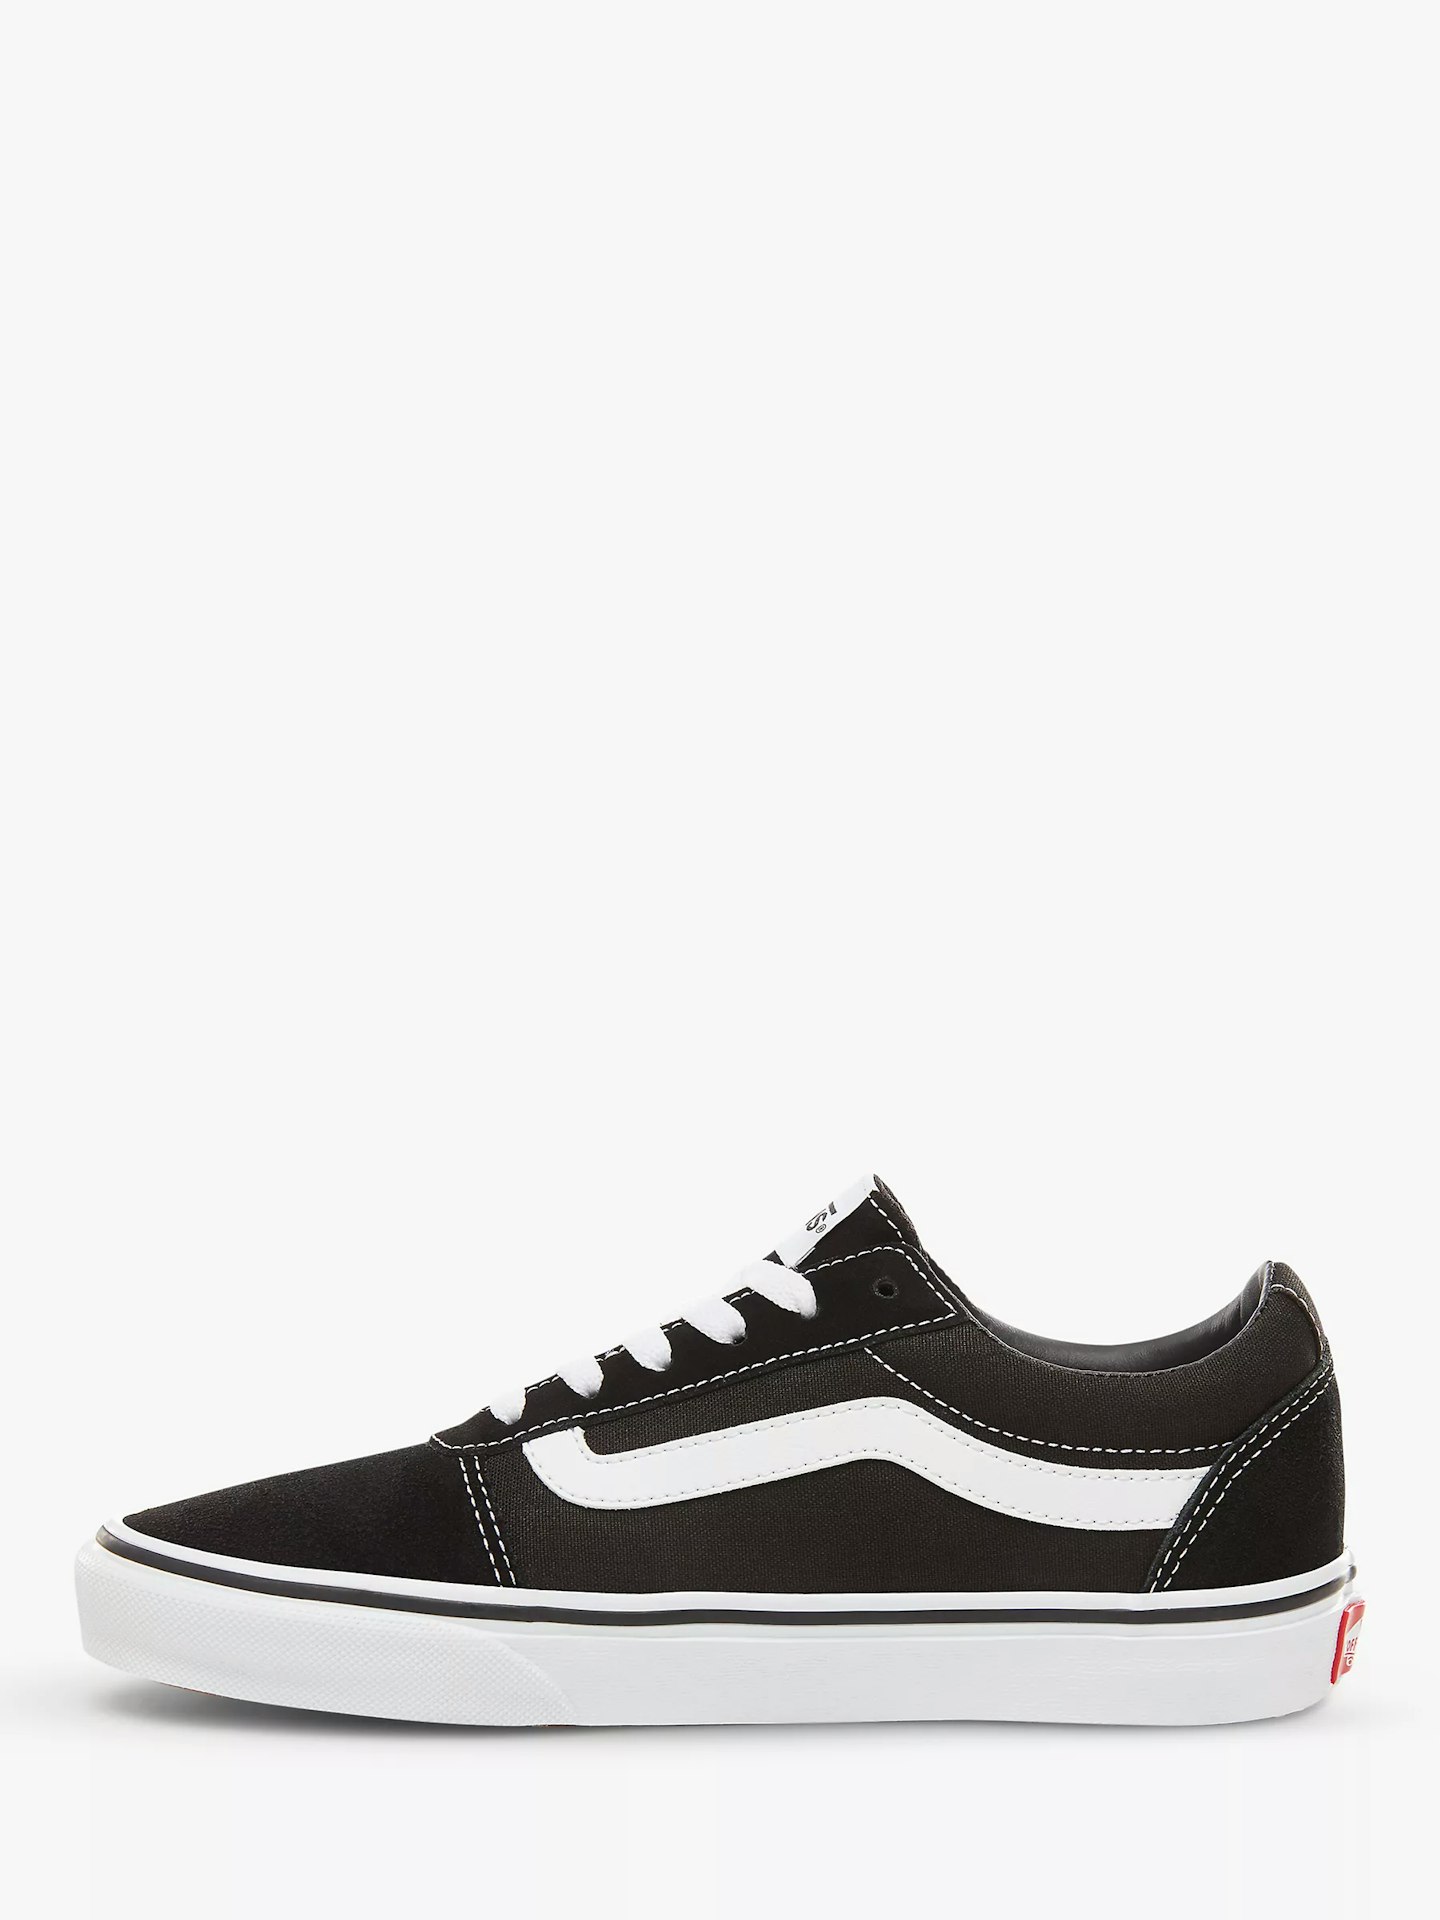 Vans, Ward Lace-Up Trainers